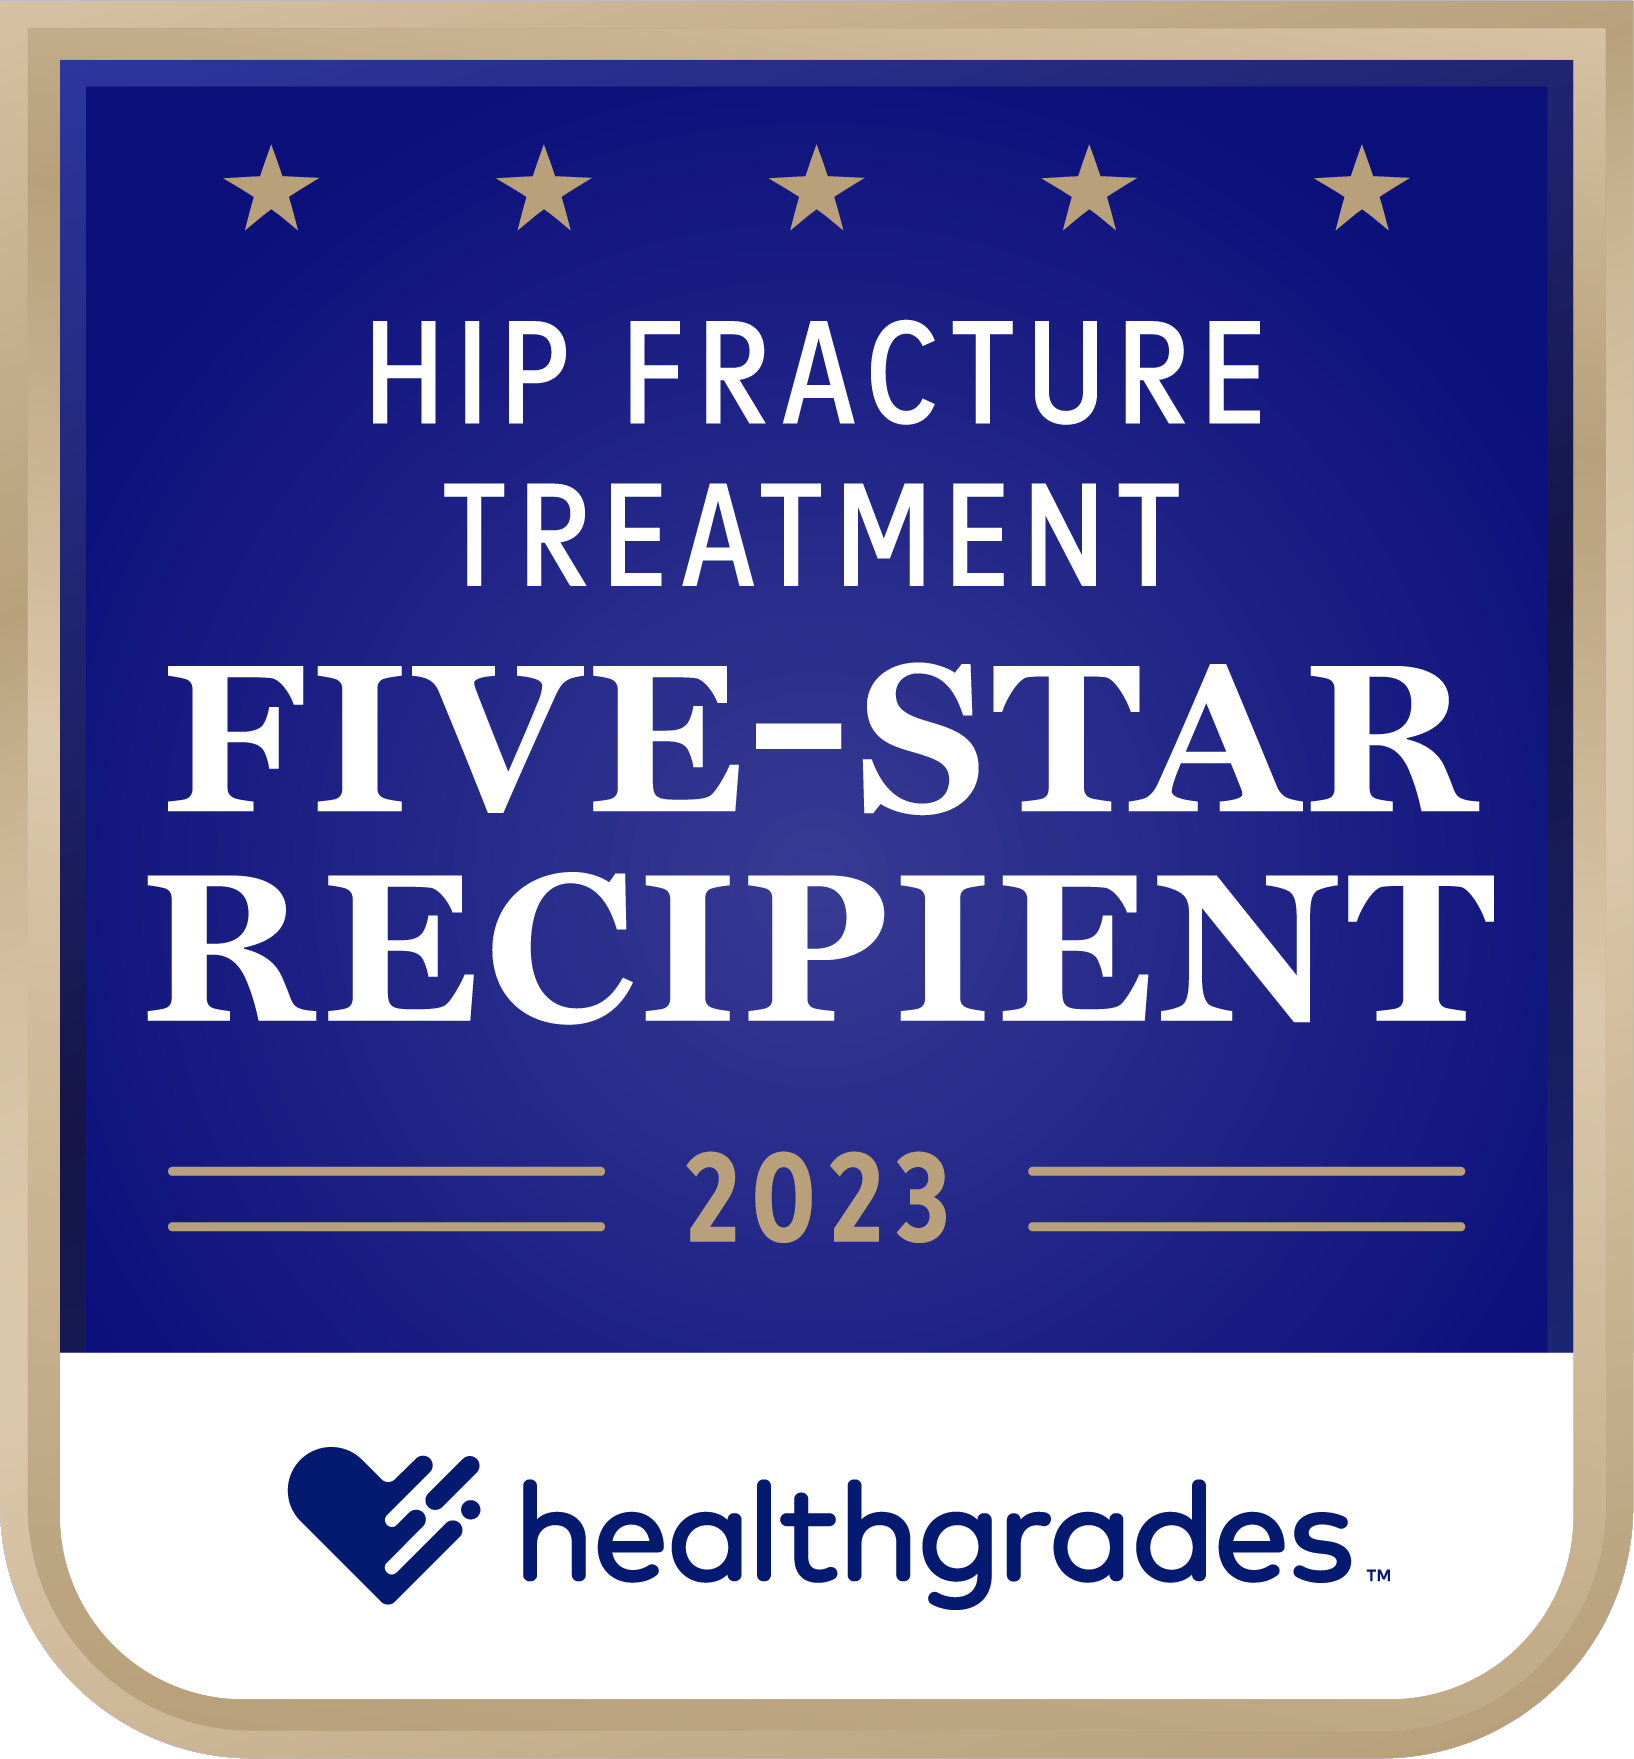 Five-Star Recipient for Hip Fracture Treatment 2023